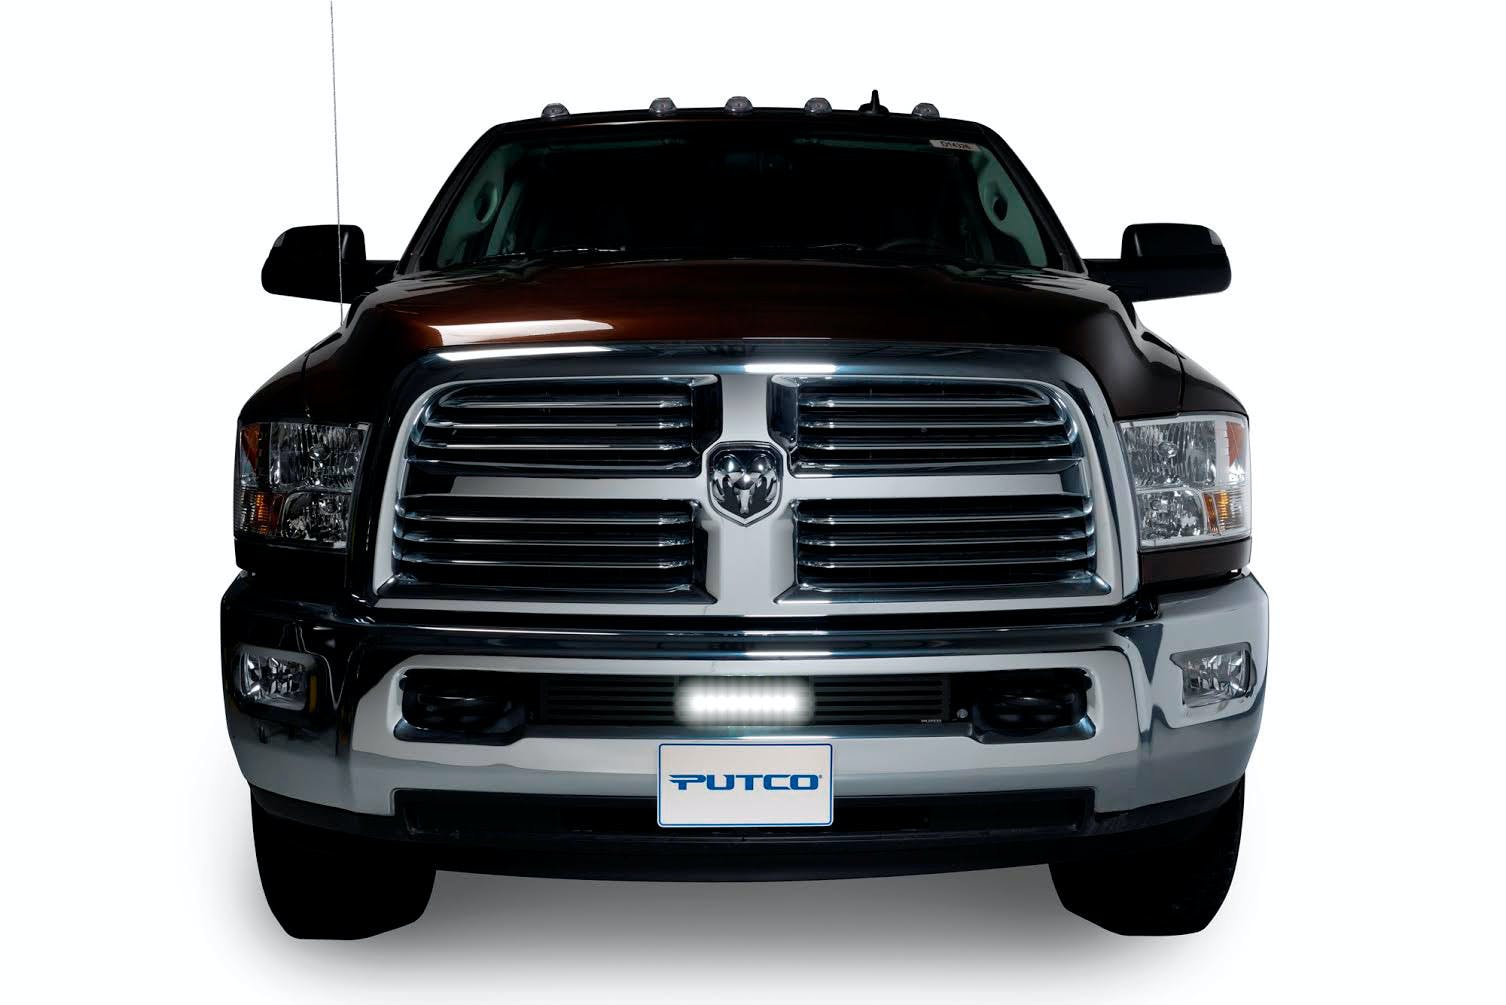 Putco 87175L Stainless Steel Bar Style with 10 inch Luminix Light bar Bumper Grille (Black)